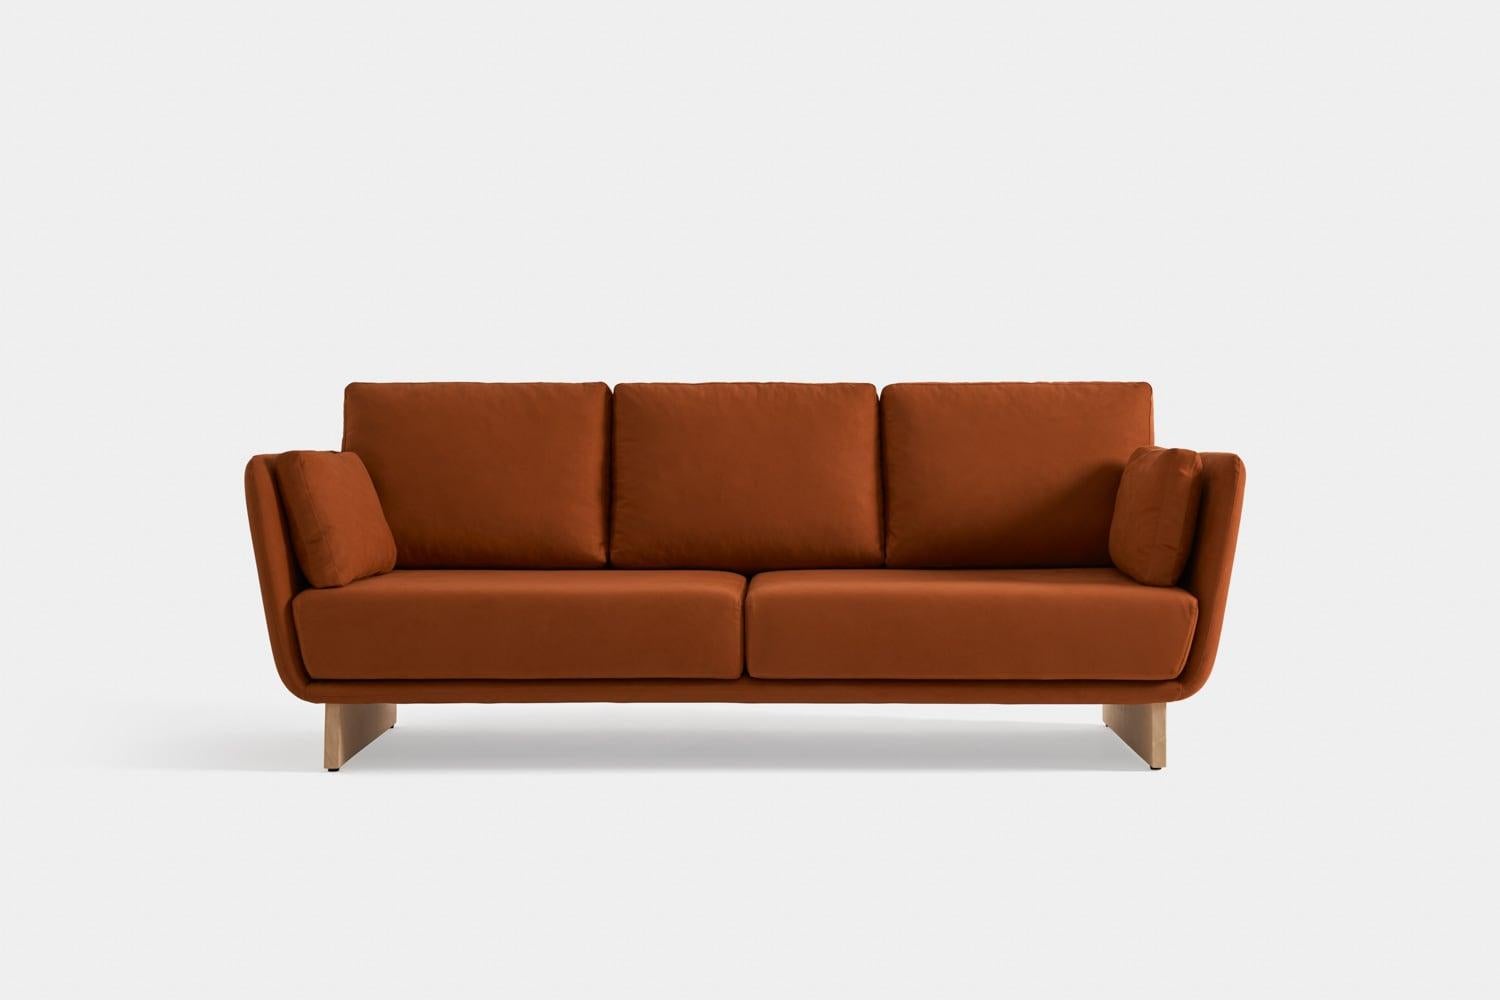 Swan sofa with wooden legs by Pepe Albargues
Dimensions: W 196 x D 93 x H 92 cm
Materials: Wood, Fibre MDF, Foam CMHR 

Variations of materials are avaliable

Swan is a collection made up of an armchair and a sofa inspired by the beauty and